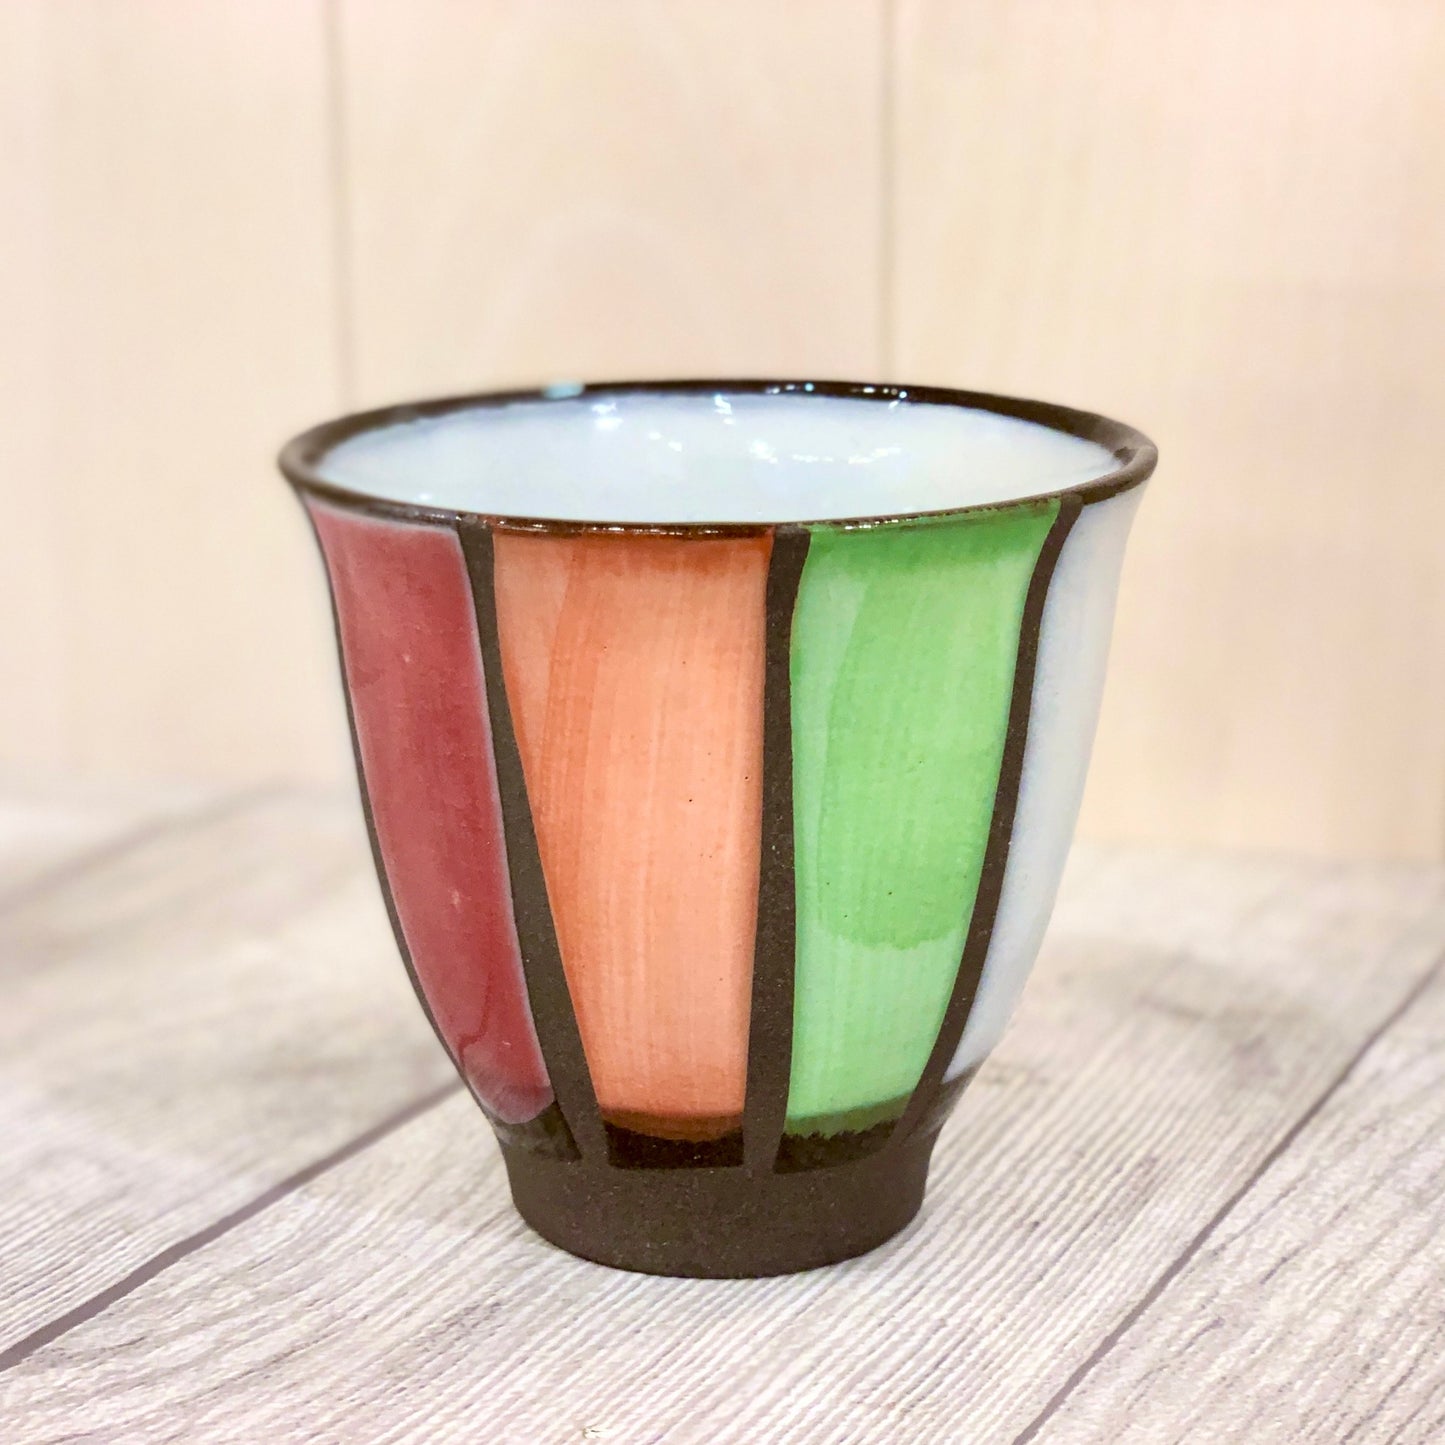 [Hasami Porcelain] [Zuiko] [Water Repellent Togusa] [Tea Cup] Cup Colorful Cute Craft Feeling Earthenware